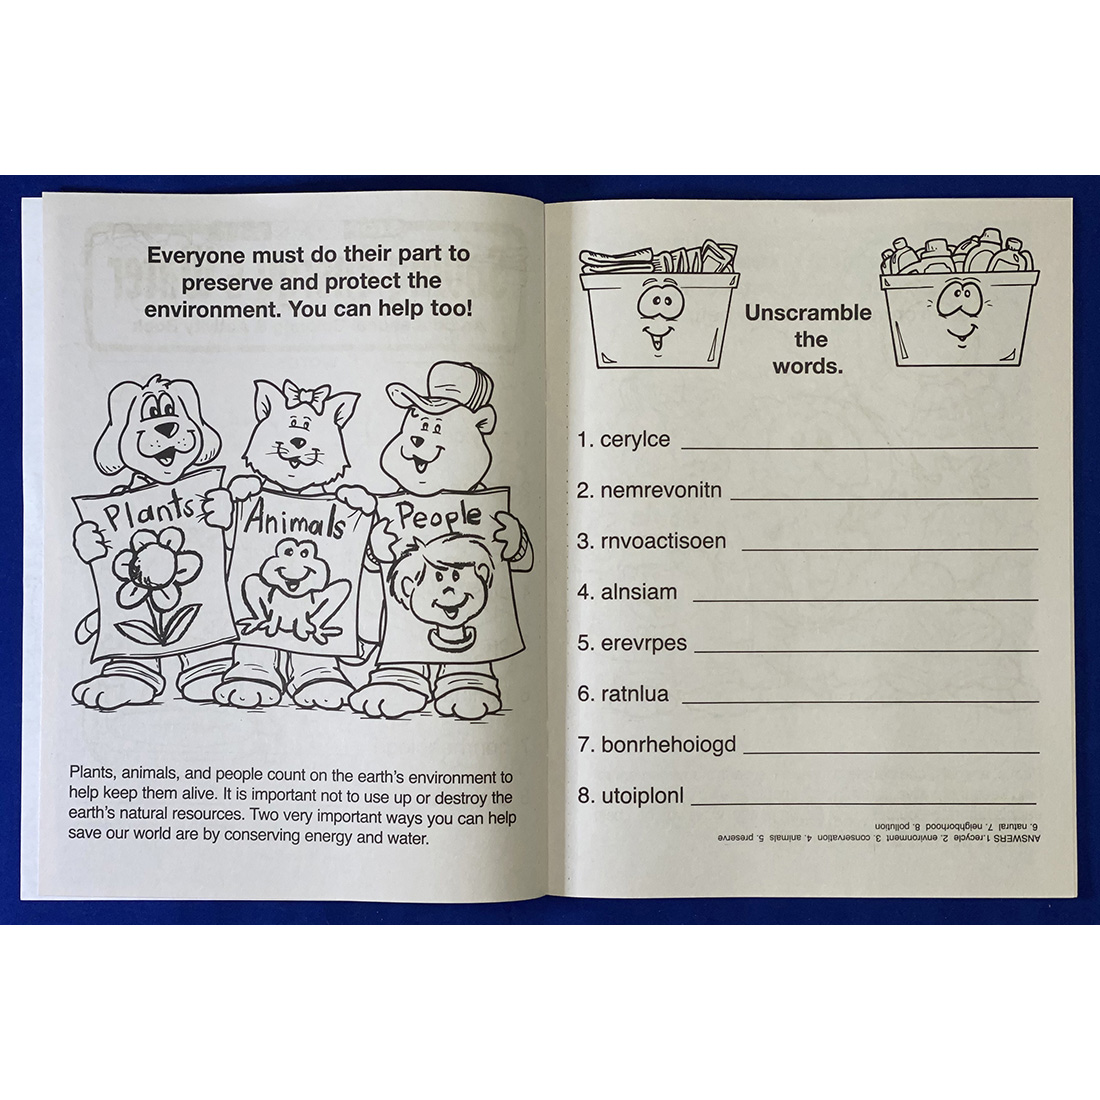 Saving Energy and Water Activity Book for Kids - Inside